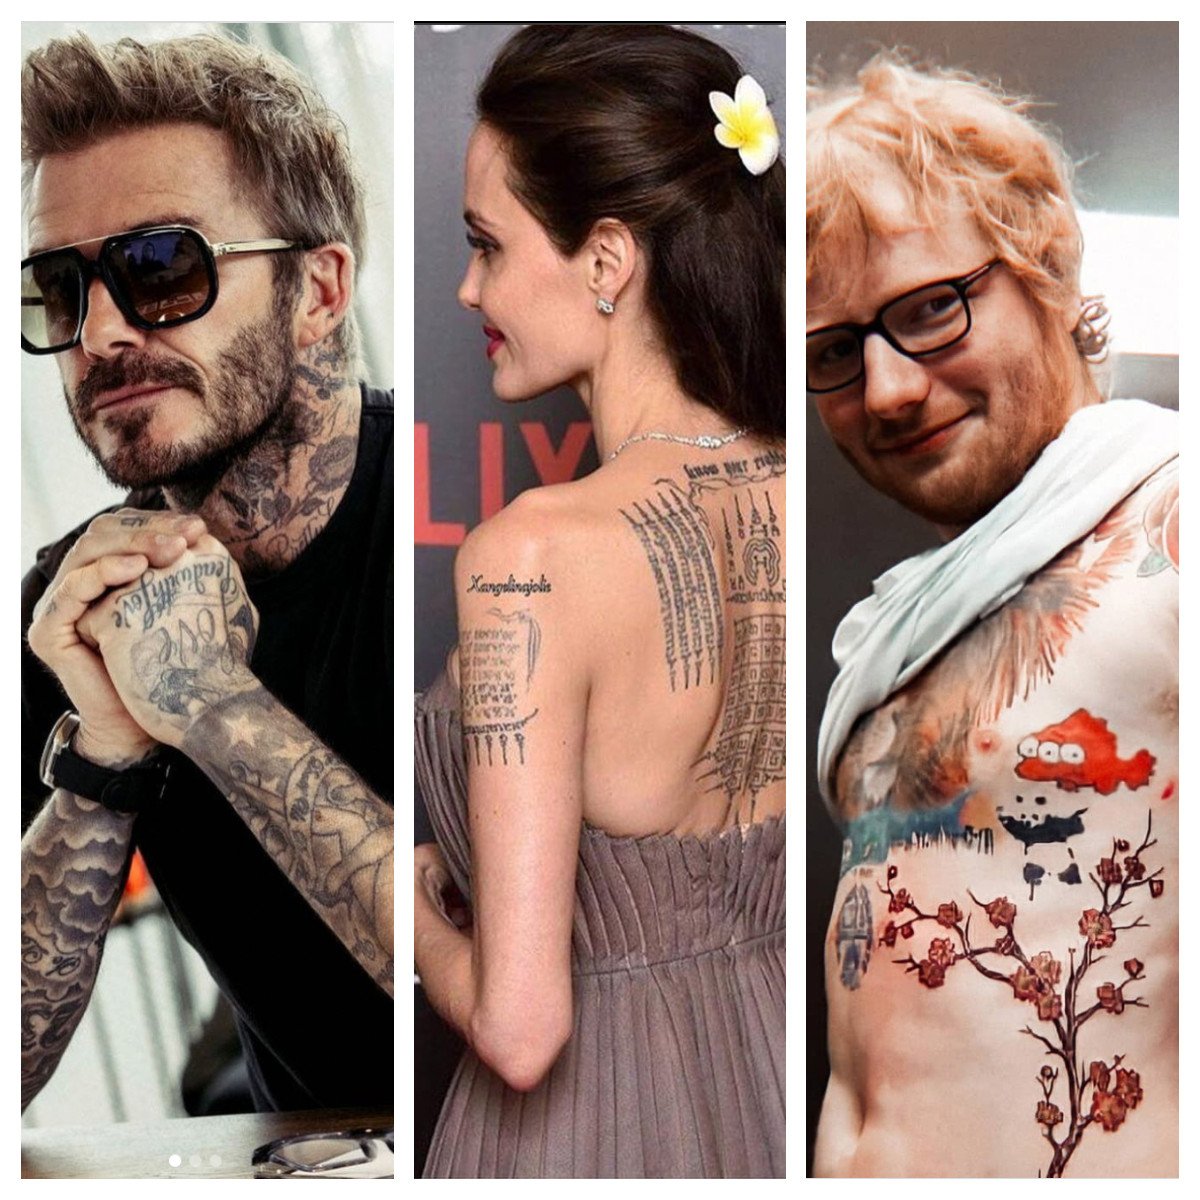 12 of the most tattoo-obsessed celebrities, from David Beckham, Ed Sheeran  and Justin Bieber, to Rihanna, Billie Eilish and Angelina Jolie – but who  has over 100 on their body?